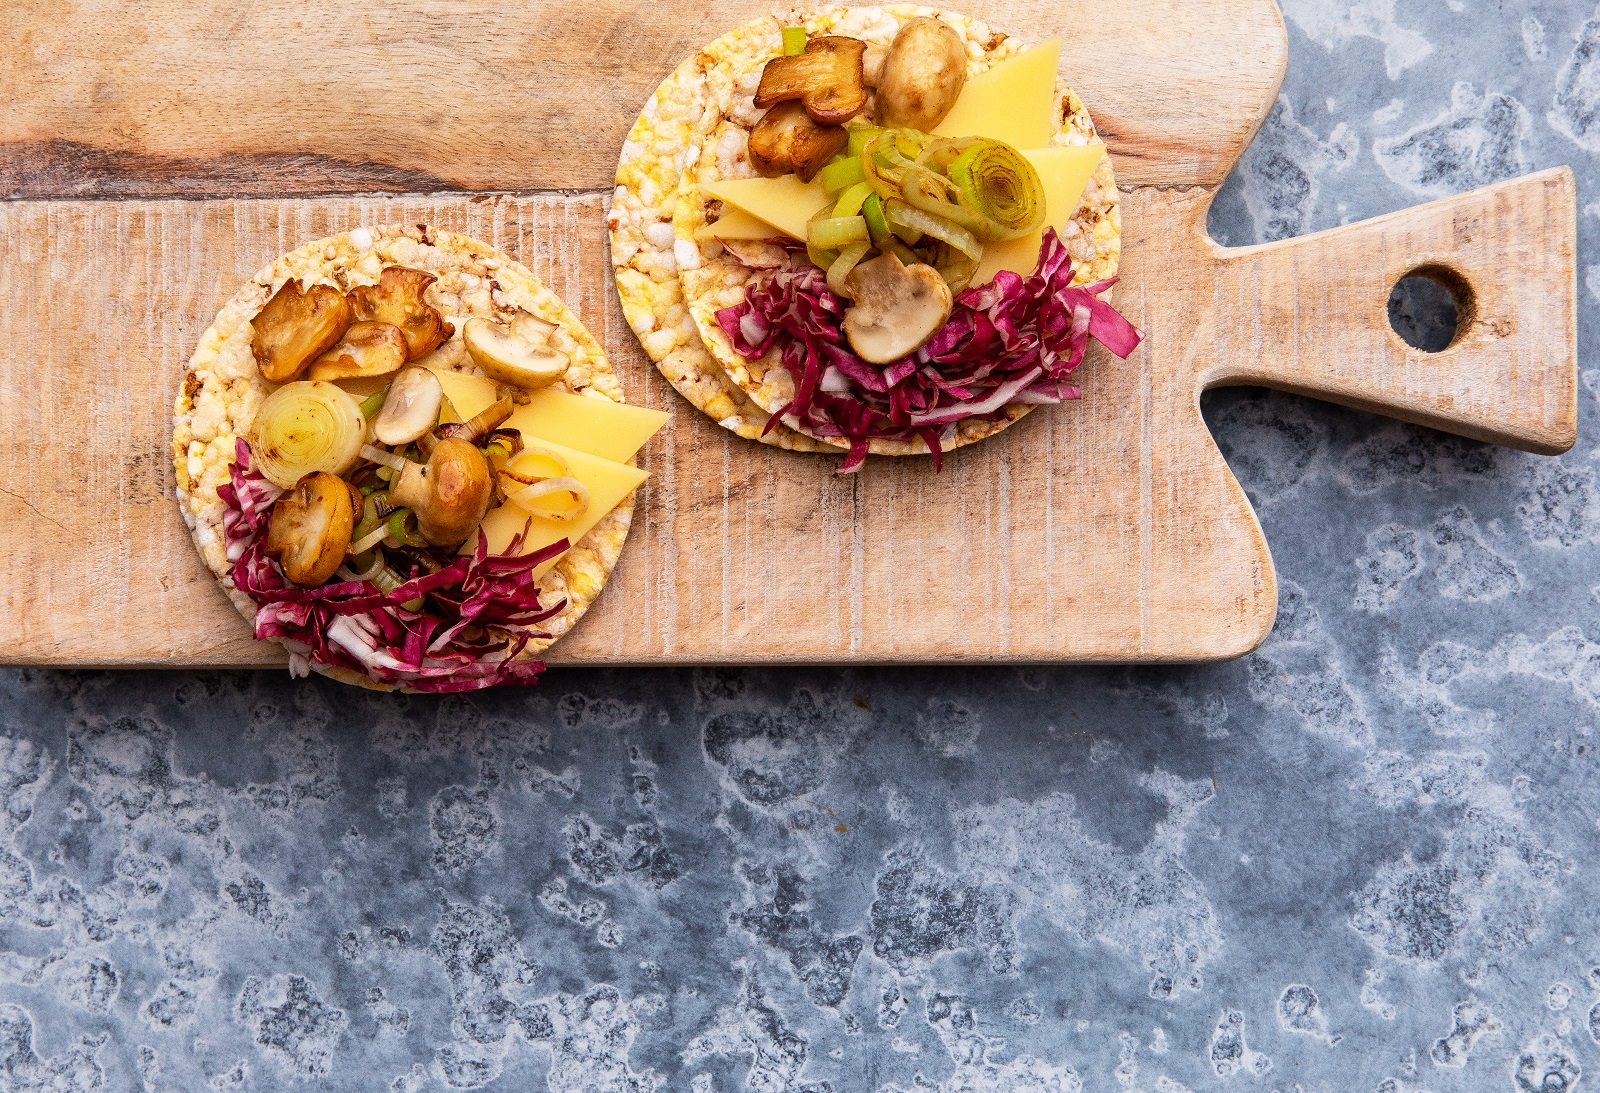 Radicchio, Gruyere Cheese, Grilled Leek & Mushroom on Corn Thins slices for a vegetarian lunch or dinner